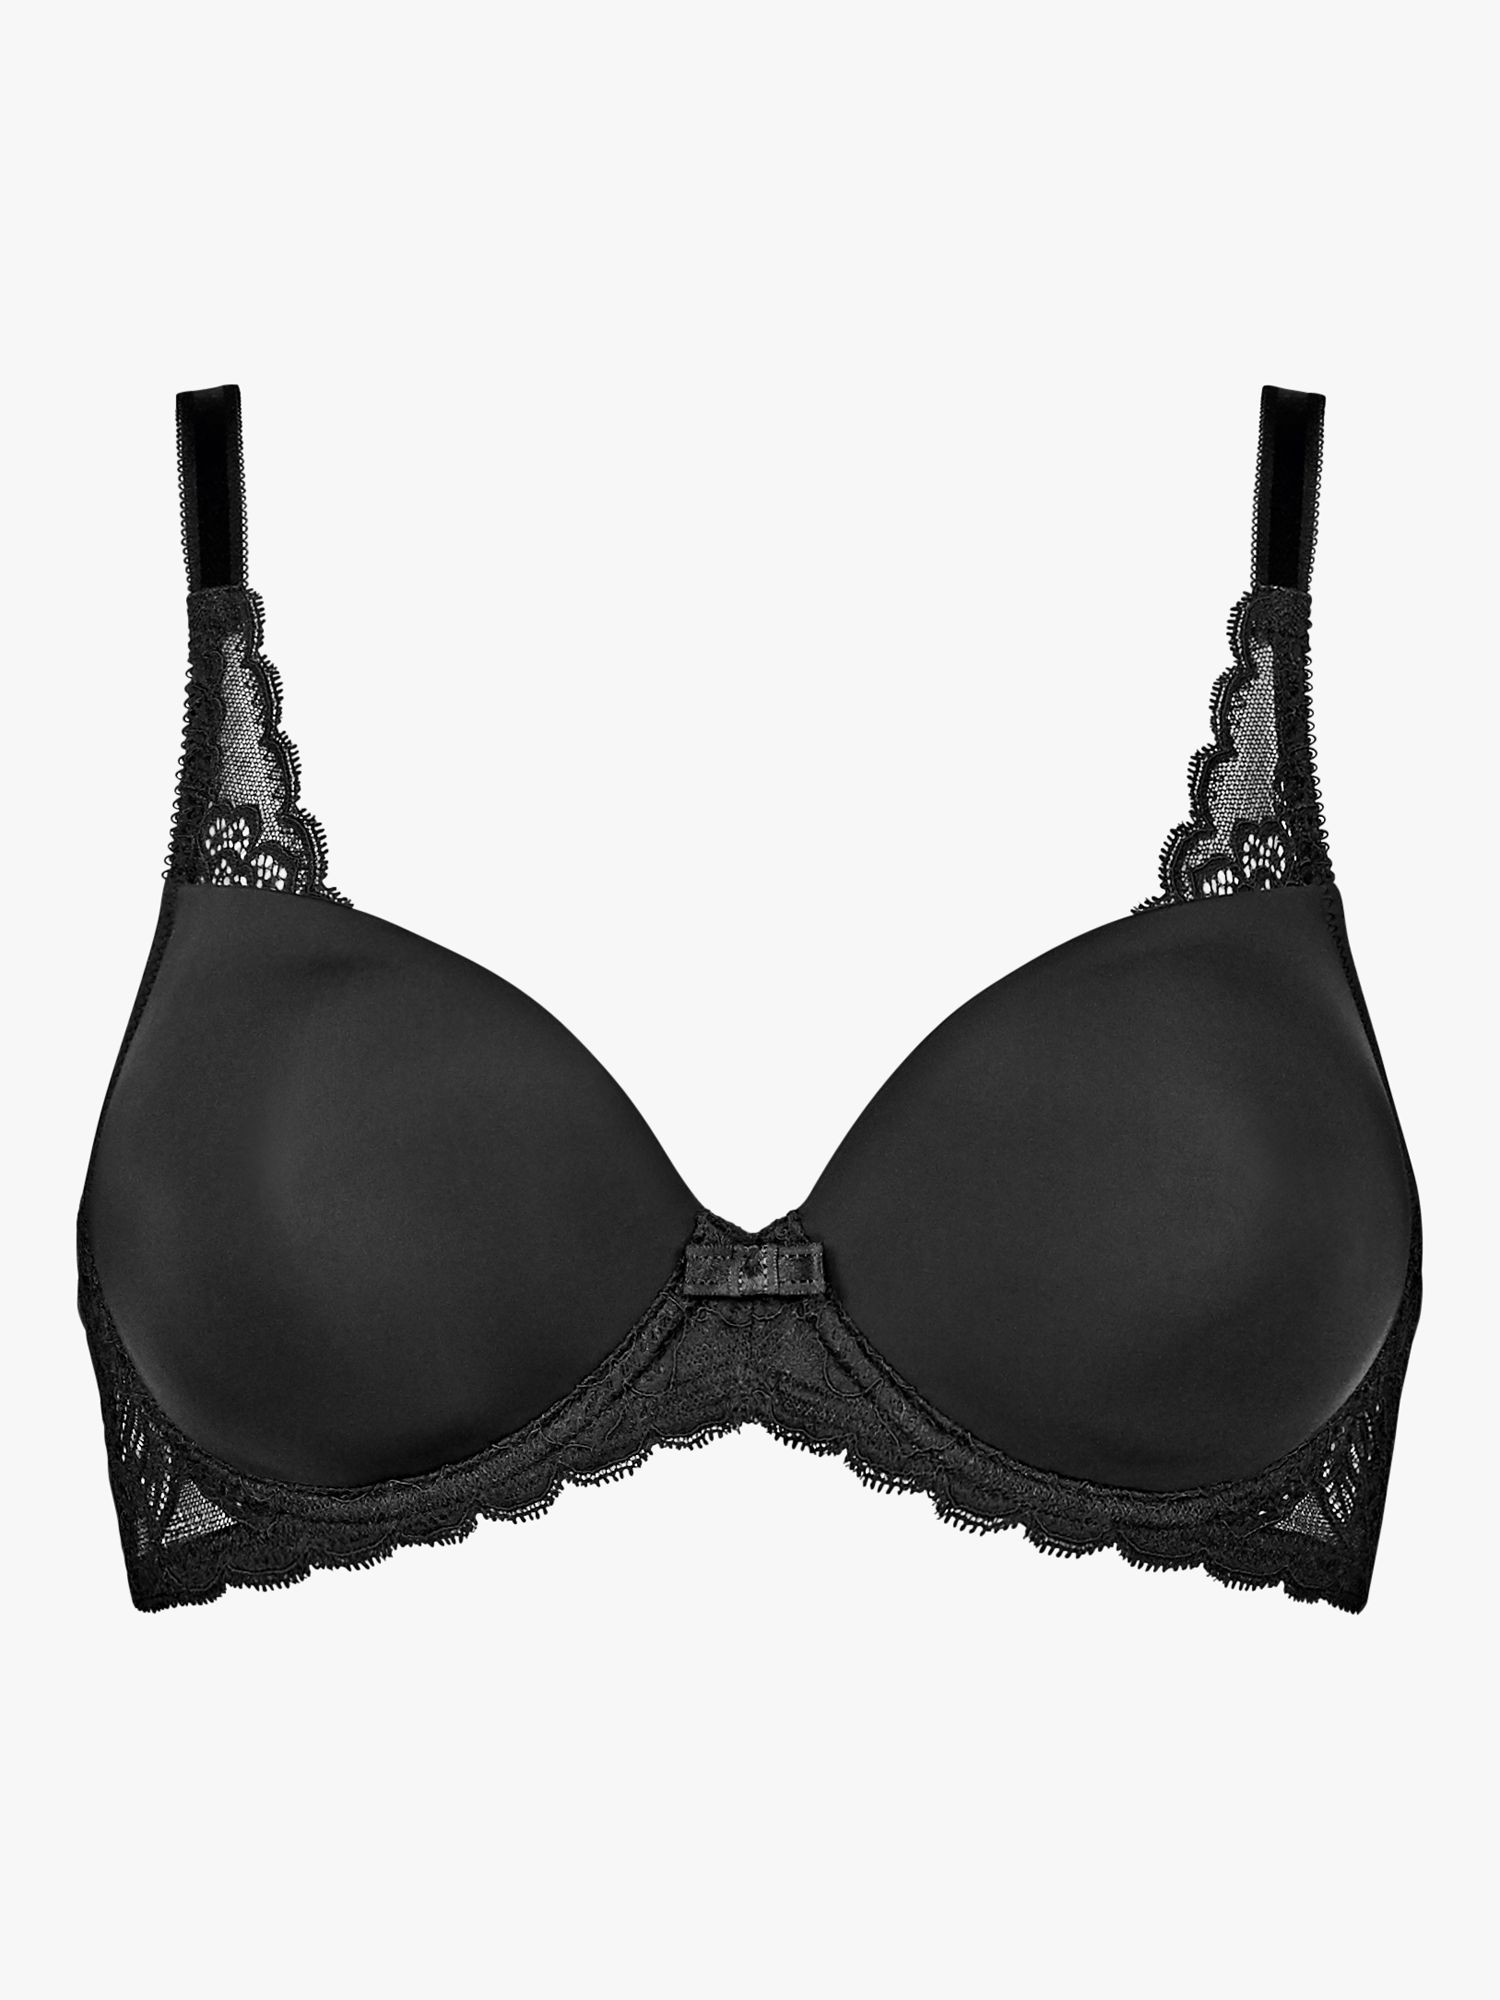 Buy Triumph T-Shirt Bra 77 Invisible Wired Padded Multi-Purpose Everyday Bra  - Black online